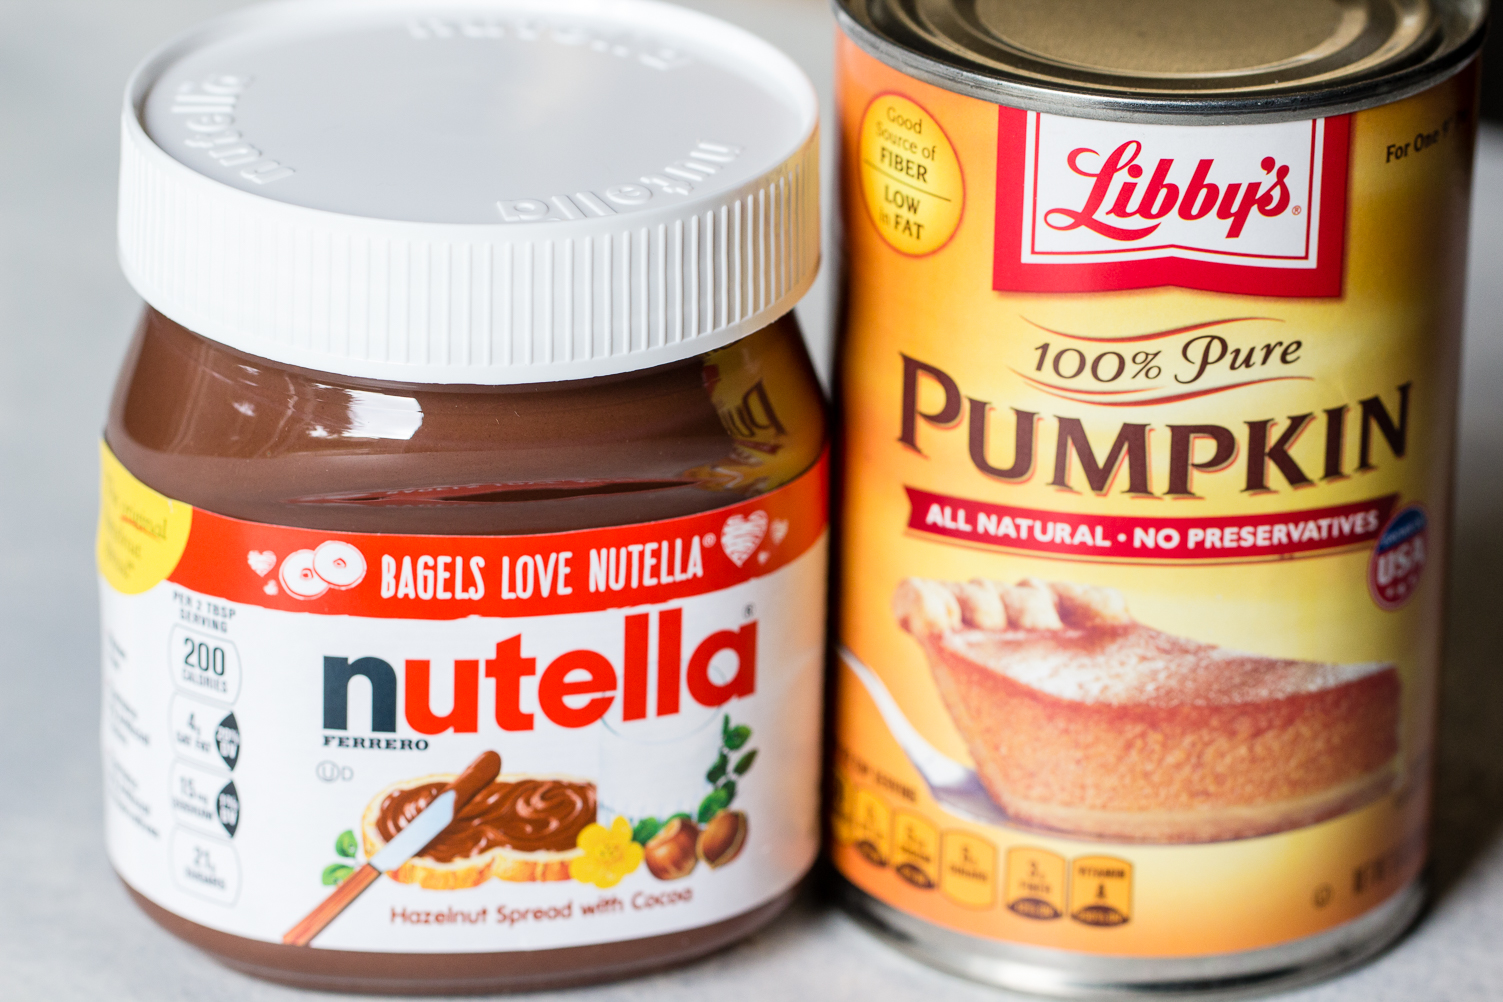 Nutella and a can of pumpkin